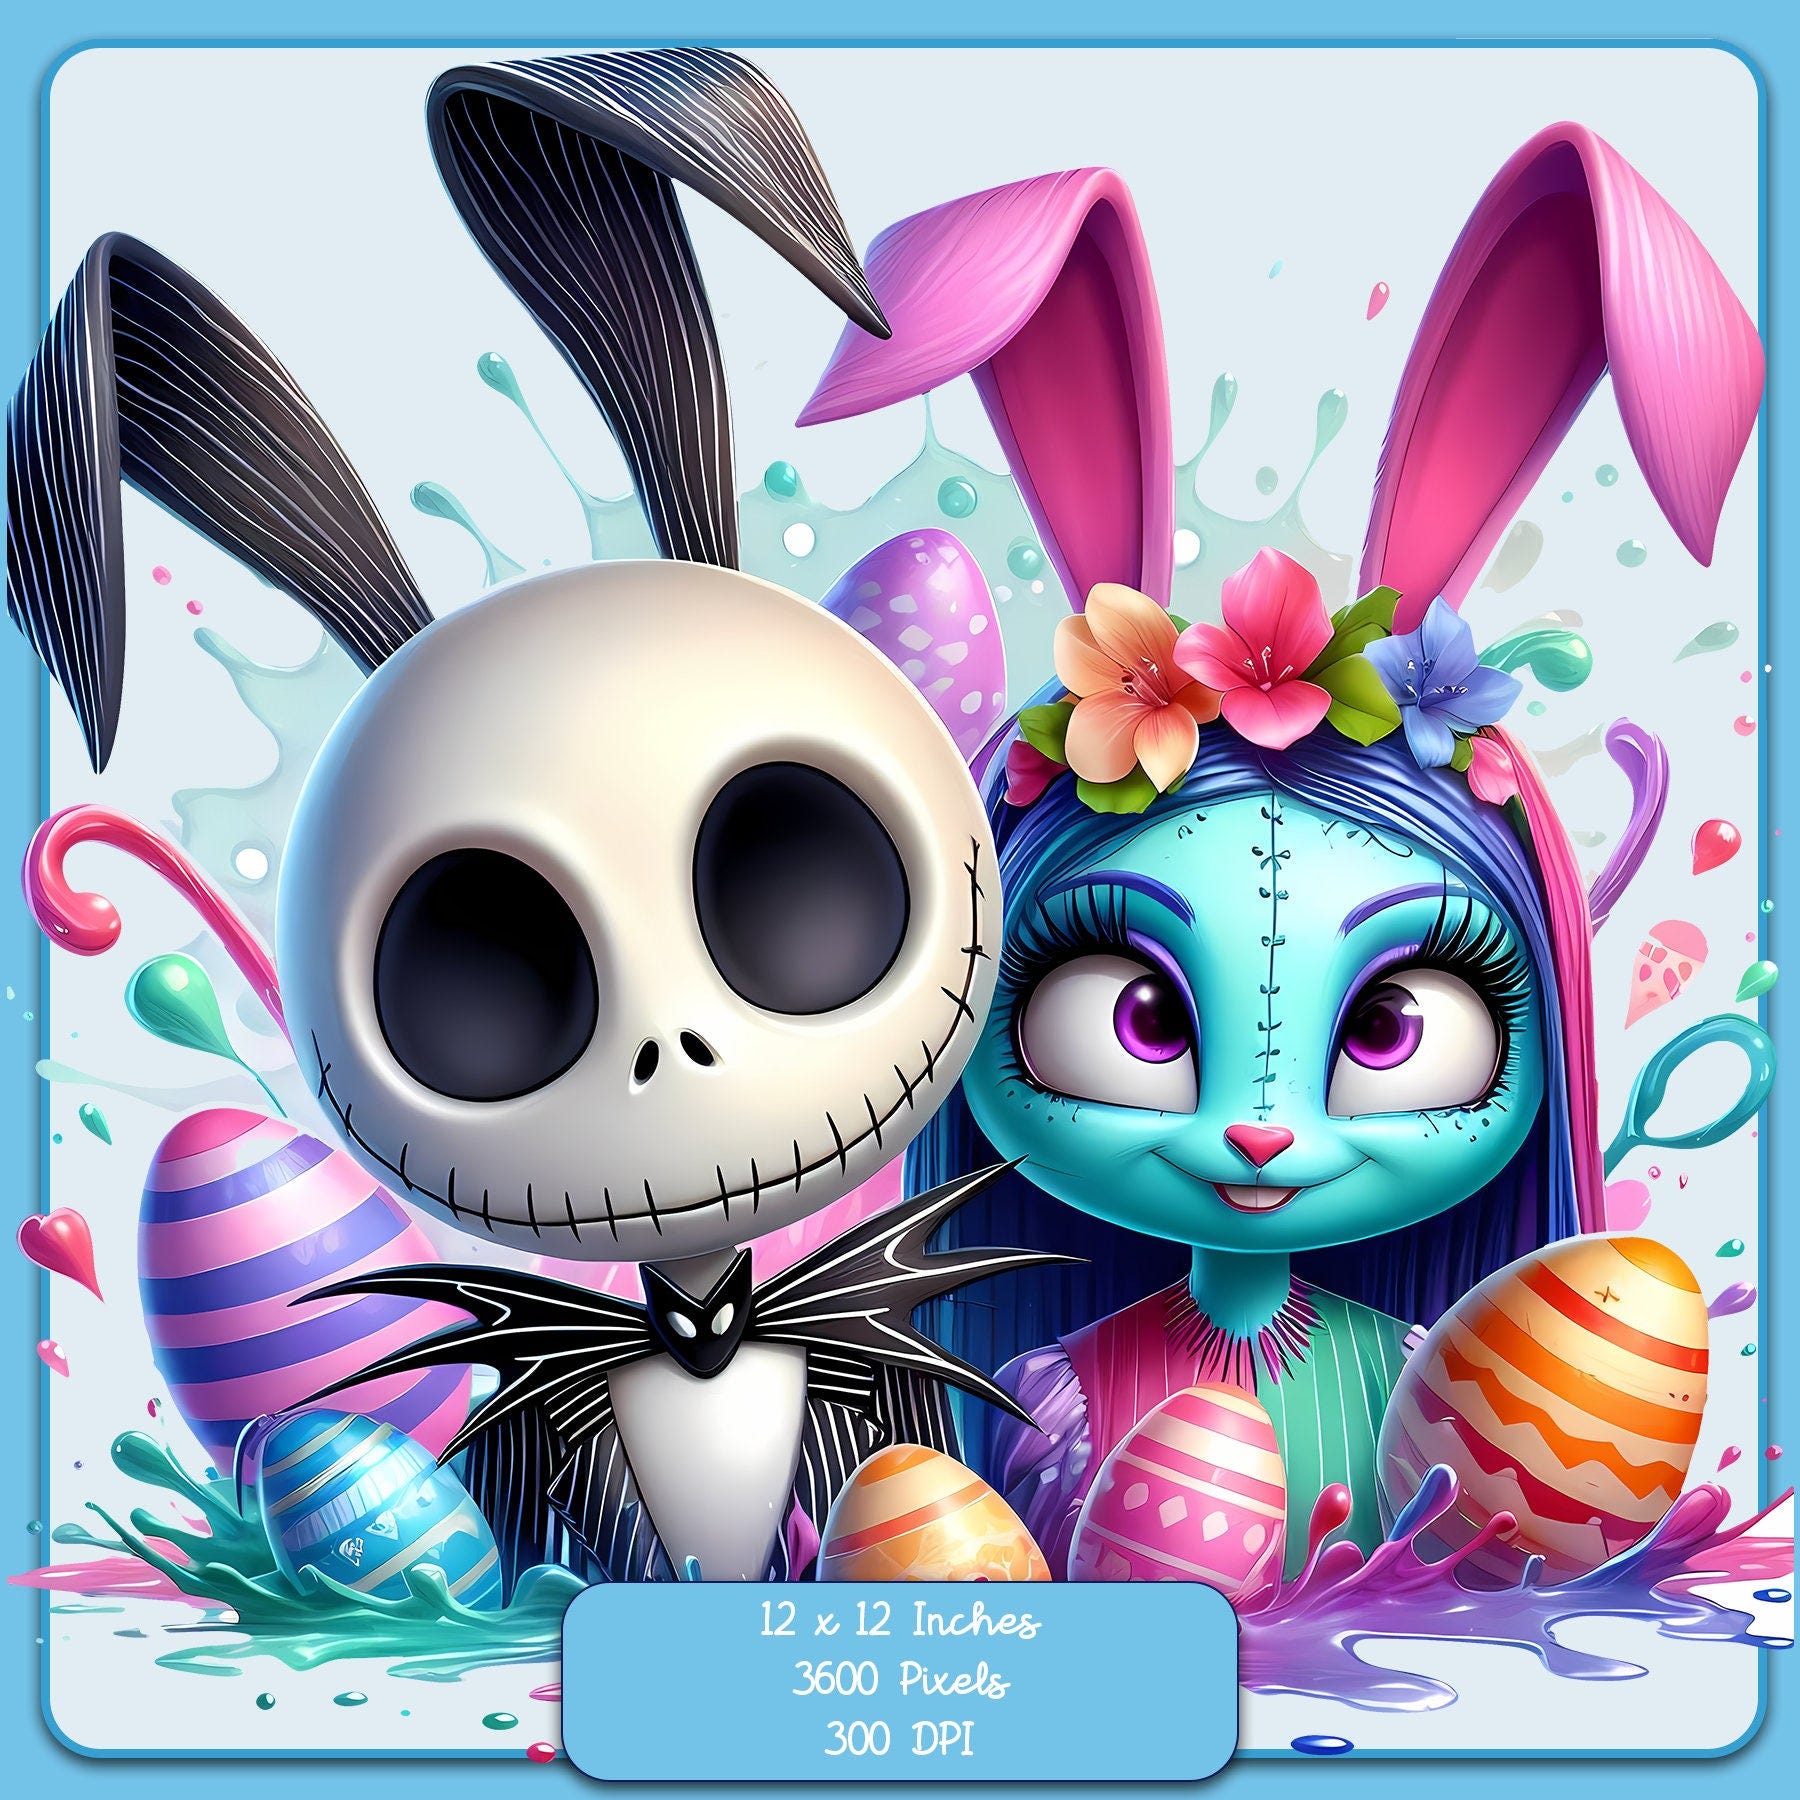 Jack and Sally Bunny Ears Watercolor Splash, Clipart Images, Graphics and Artwork, Rainbow Aesthetic, PNG Christmas Nightmare Images